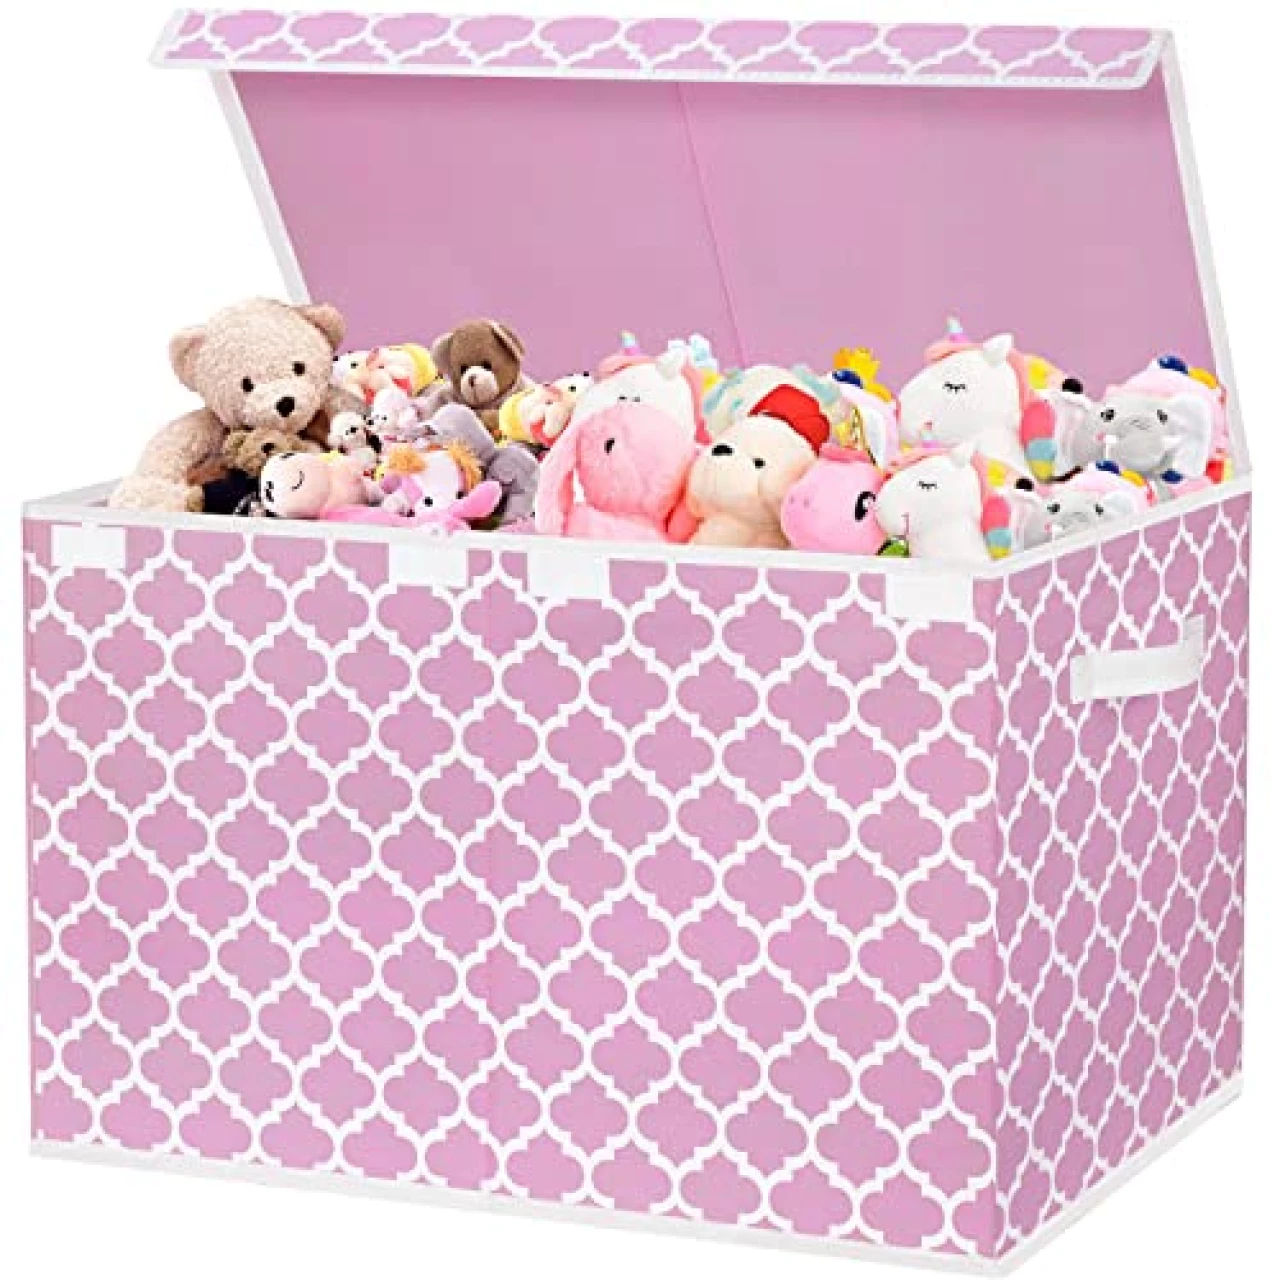 homyfort Toy Box for Girls, Kids - Large Toy Chest Organizers and Storage Boxes with Flip-Top Lid &amp; Divider, Collapsible Container Bins for Playroom, Nursery, Closet, Living Room, 24.5&quot;x13&quot;x16&quot;, Pink